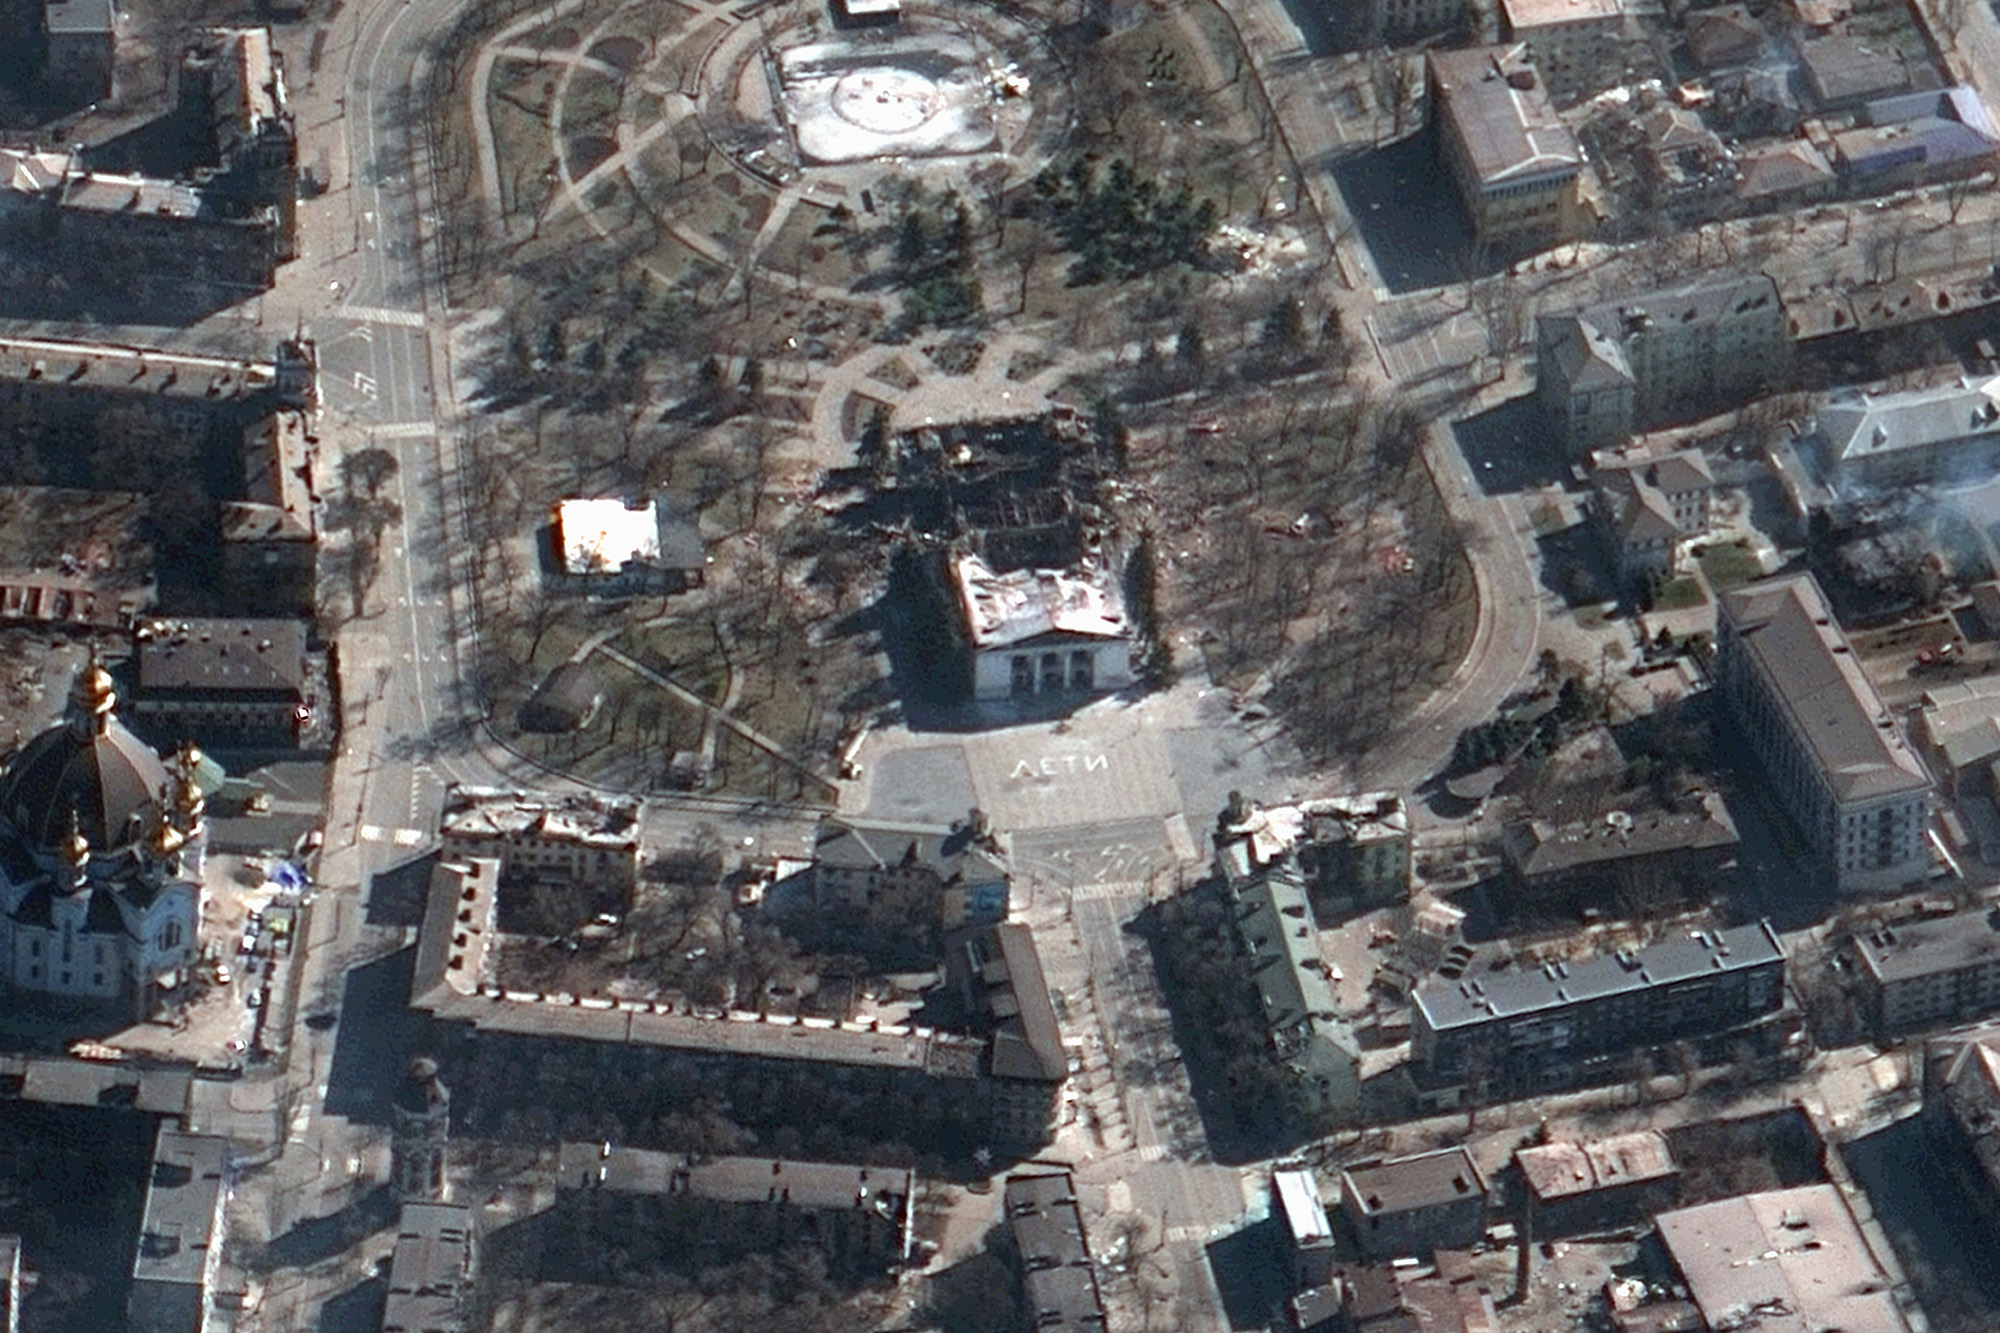 The Mariupol drama theater following a Russian airstrike, in&nbsp;Mariupol Ukraine, on March 19.